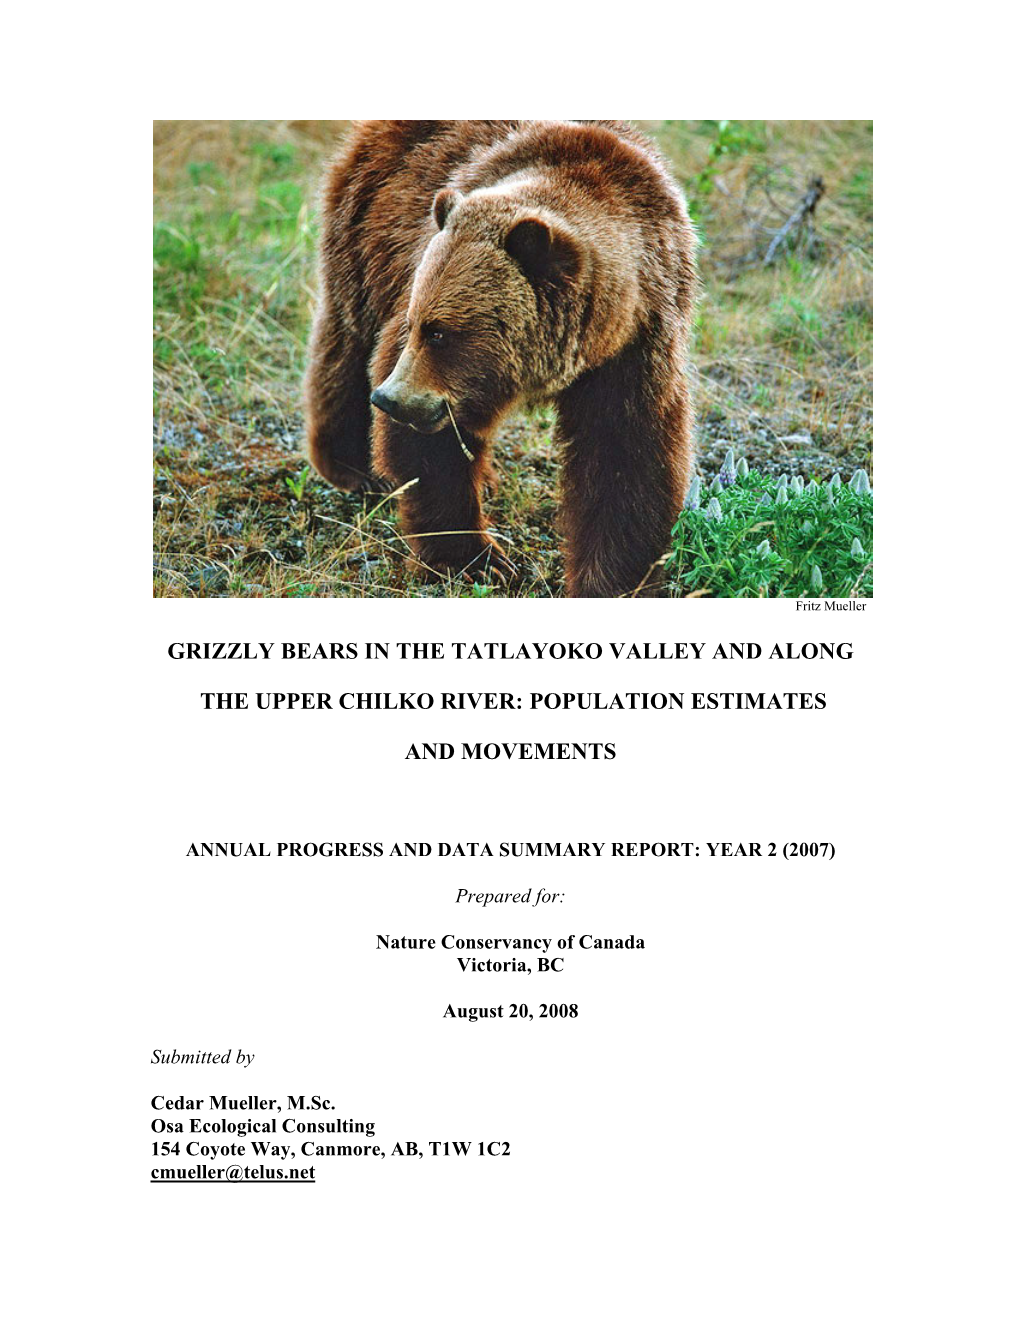 Grizzly Bears in the Tatlayoko Valley and Along the Upper Chilko River: Population Estimates and Movements